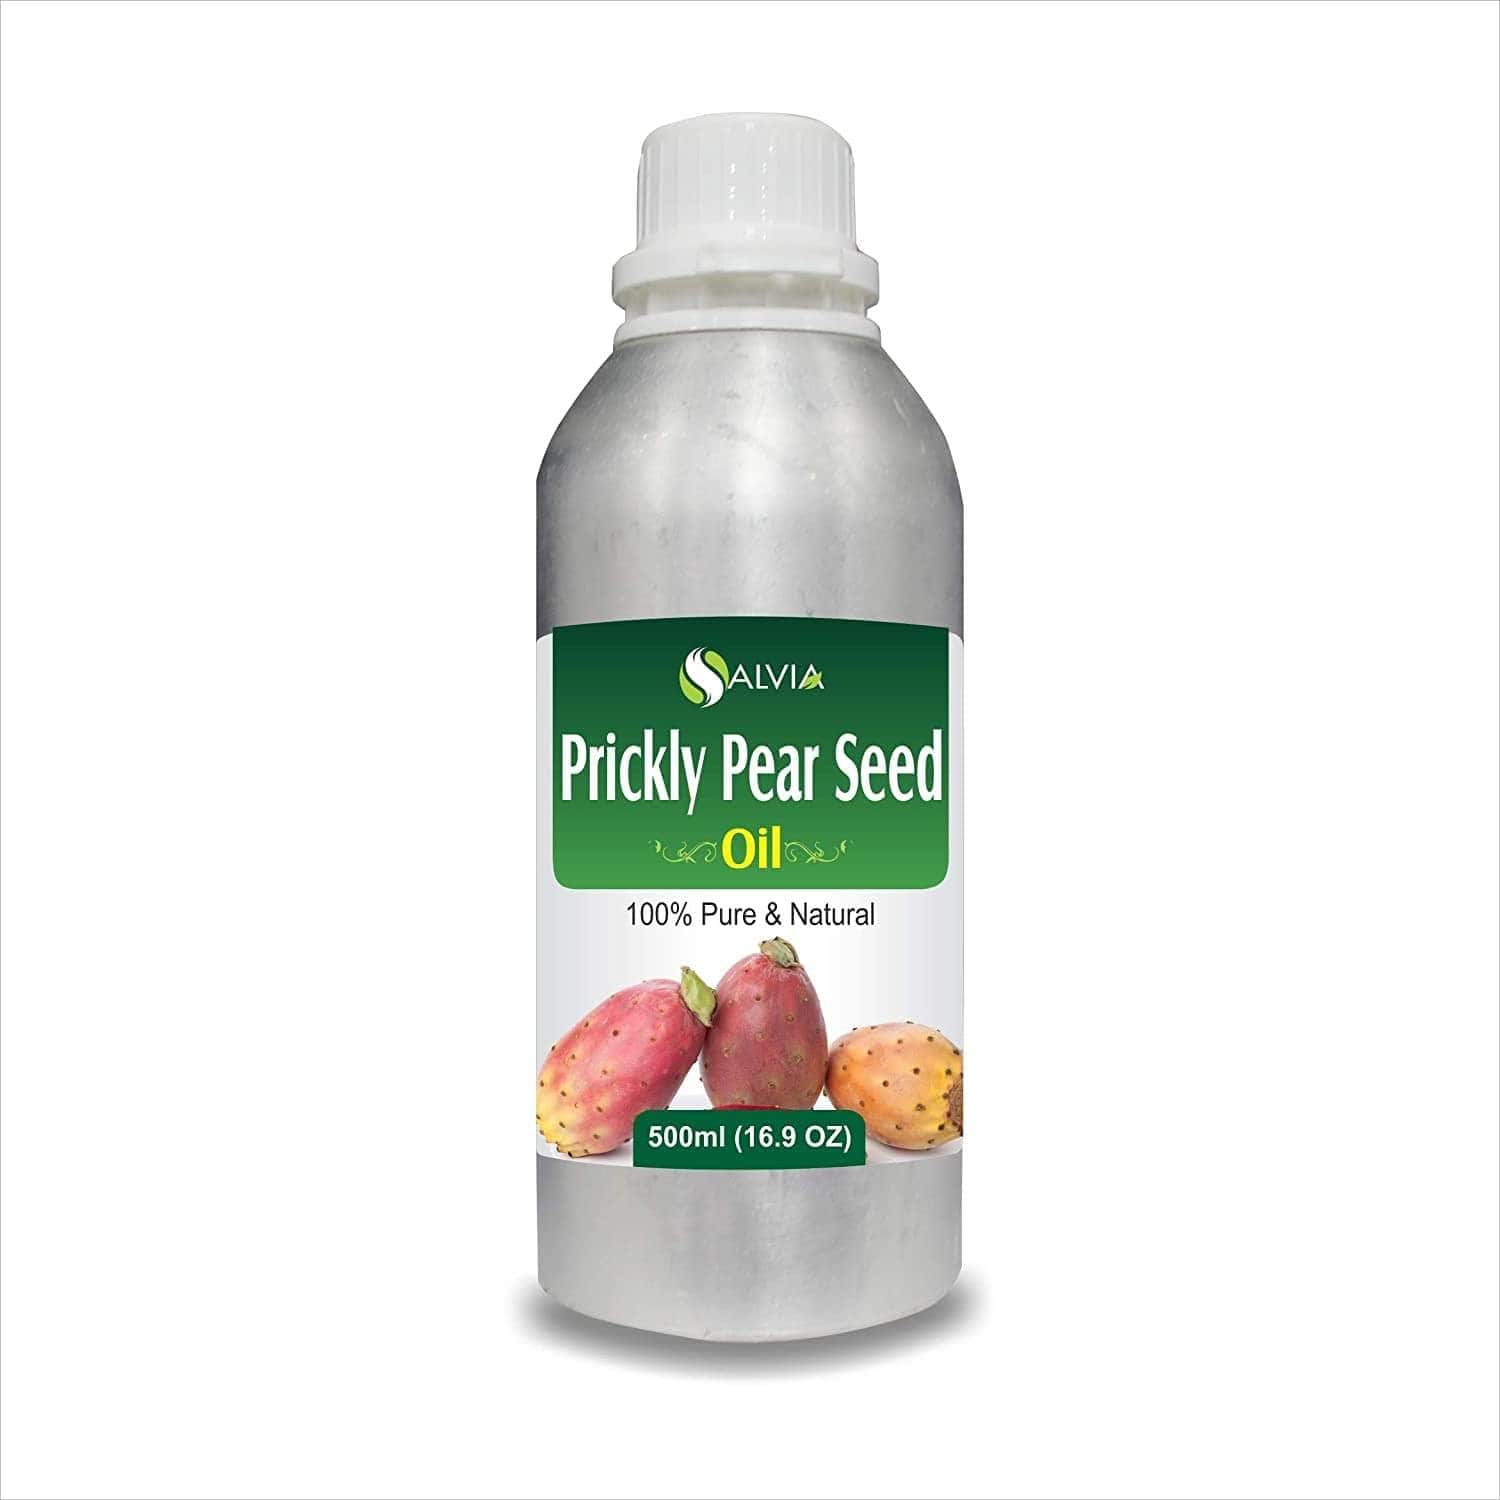 Organic Prickly Pear Seed Oil